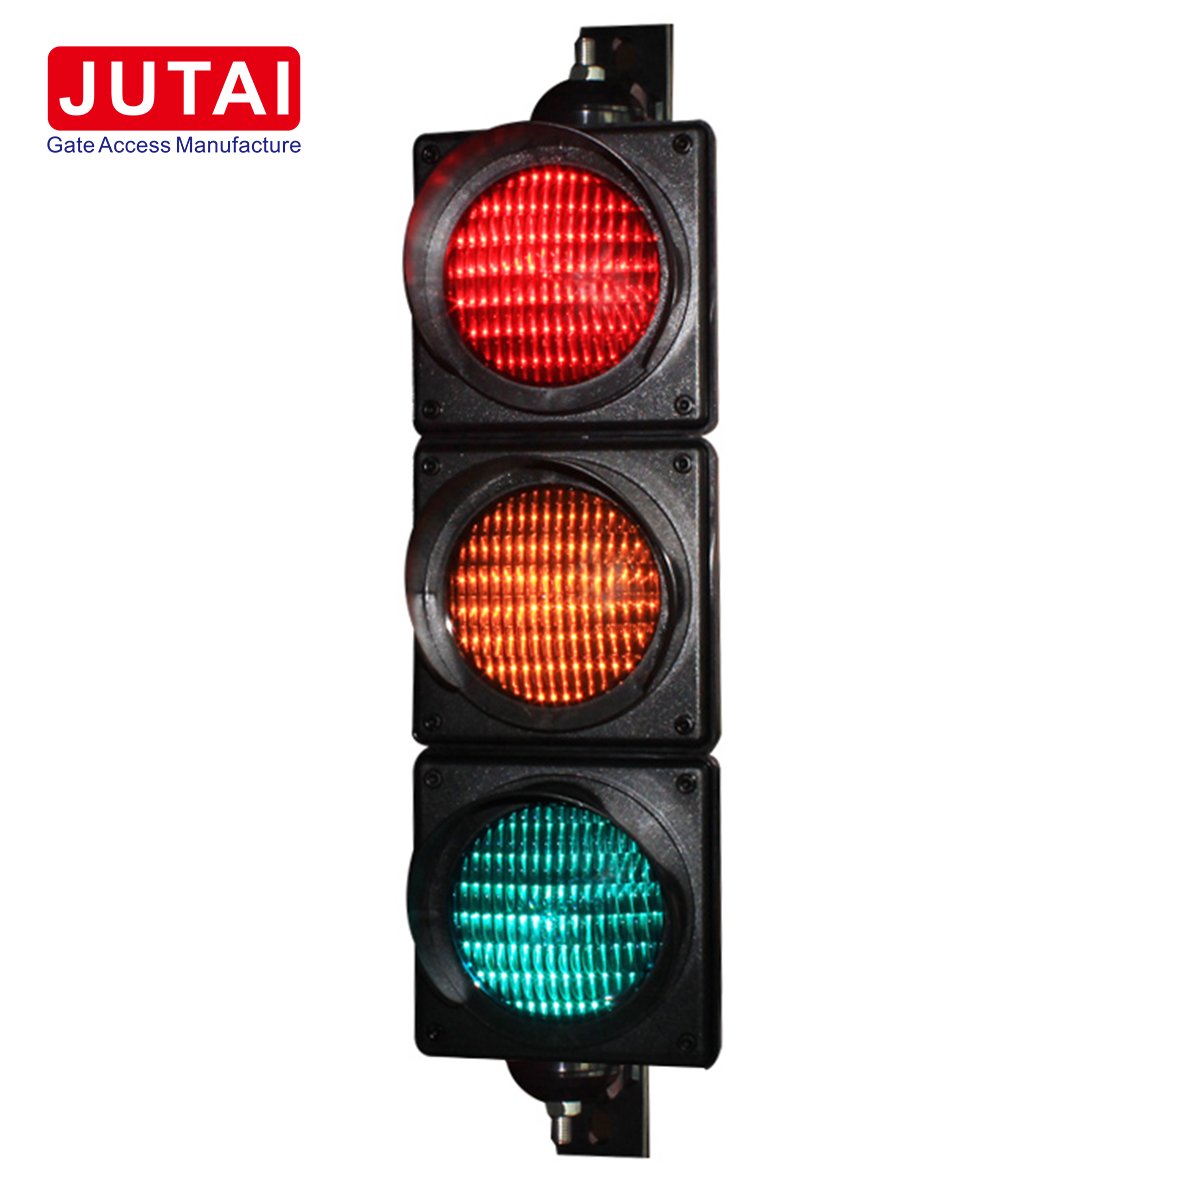 Electrical high flux traffic light Signal 3 color